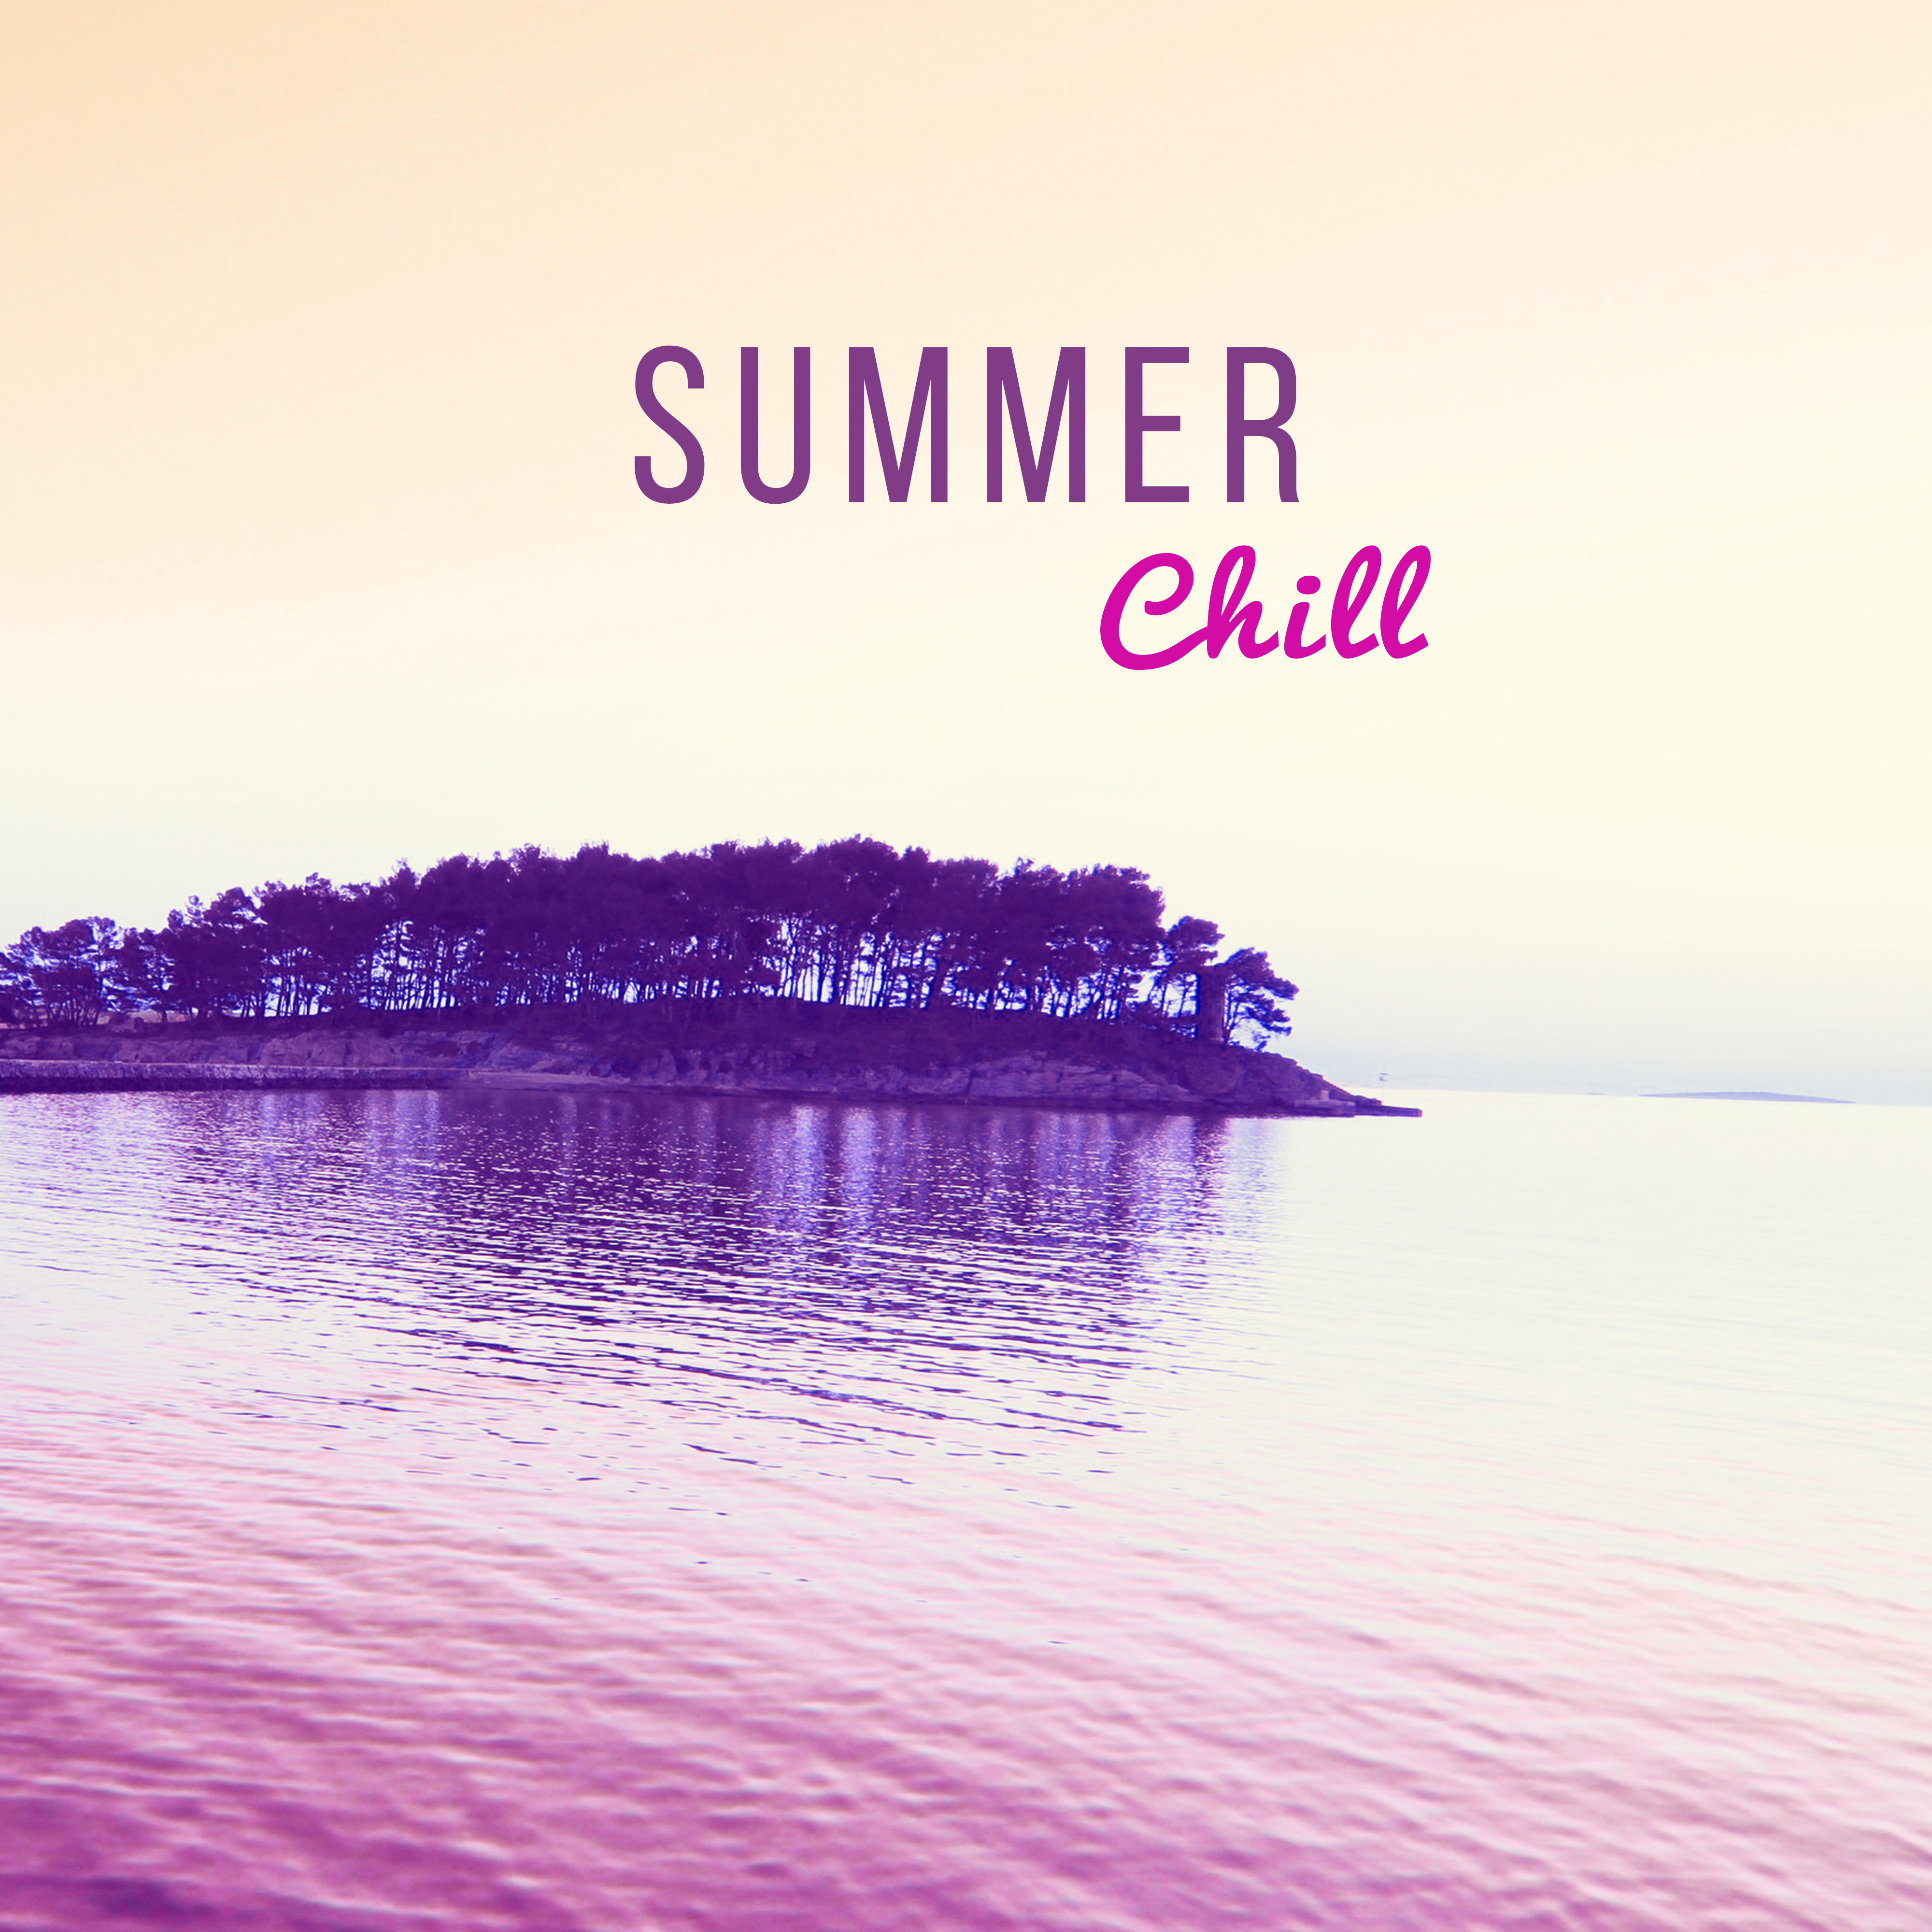 Summer Chill – Music to Rest, No More Stress, Beach Lounge, Cocktail Bar, Holiday Journey